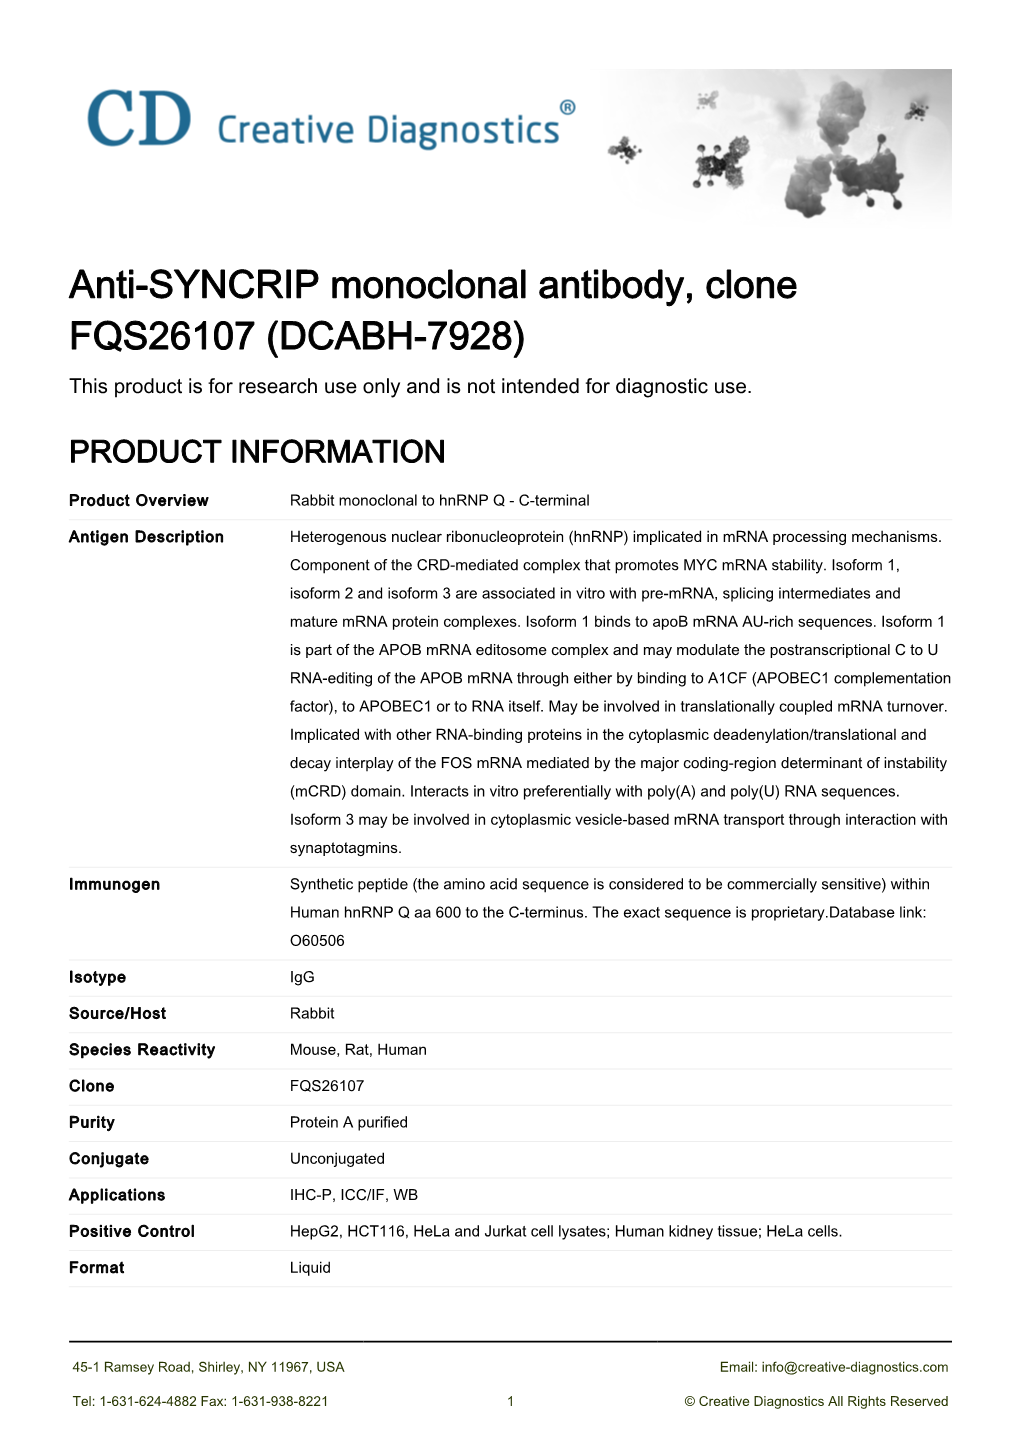 Anti-SYNCRIP Monoclonal Antibody, Clone FQS26107 (DCABH-7928) This Product Is for Research Use Only and Is Not Intended for Diagnostic Use